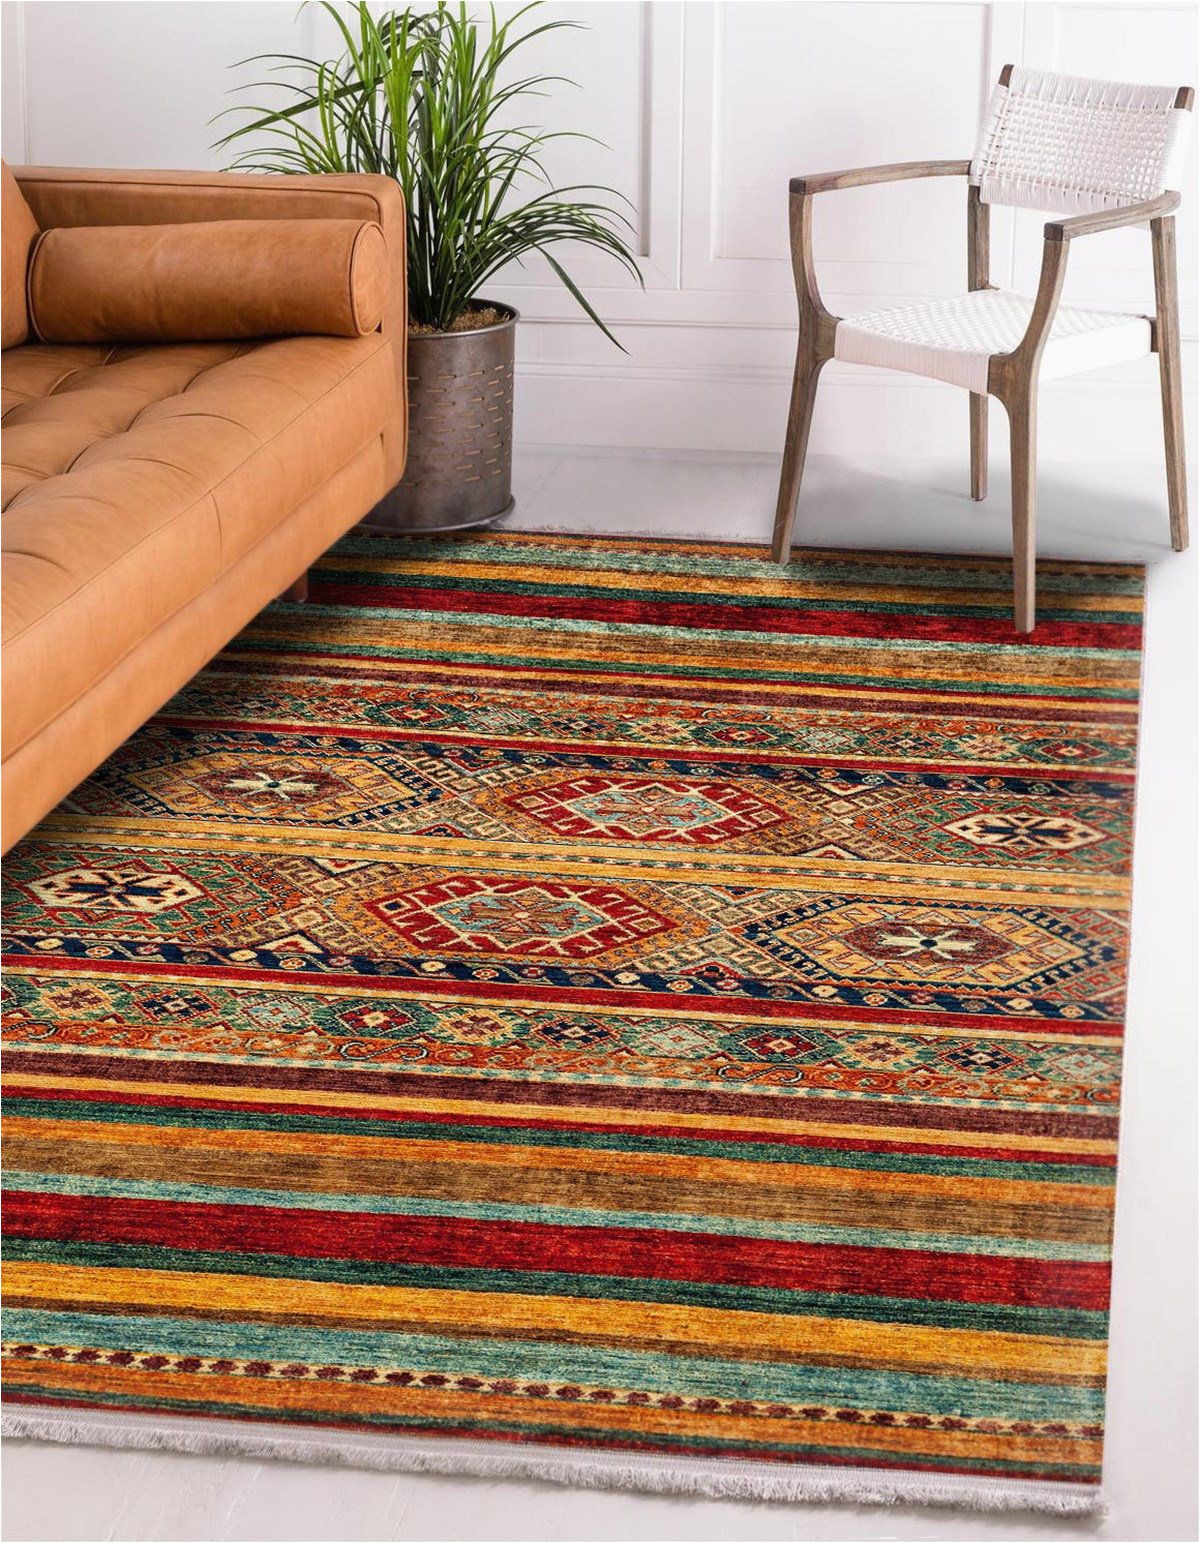 Area Rugs Made In Turkey Rugs Made In Turkey Home Decor area Rugs Modern Rugs